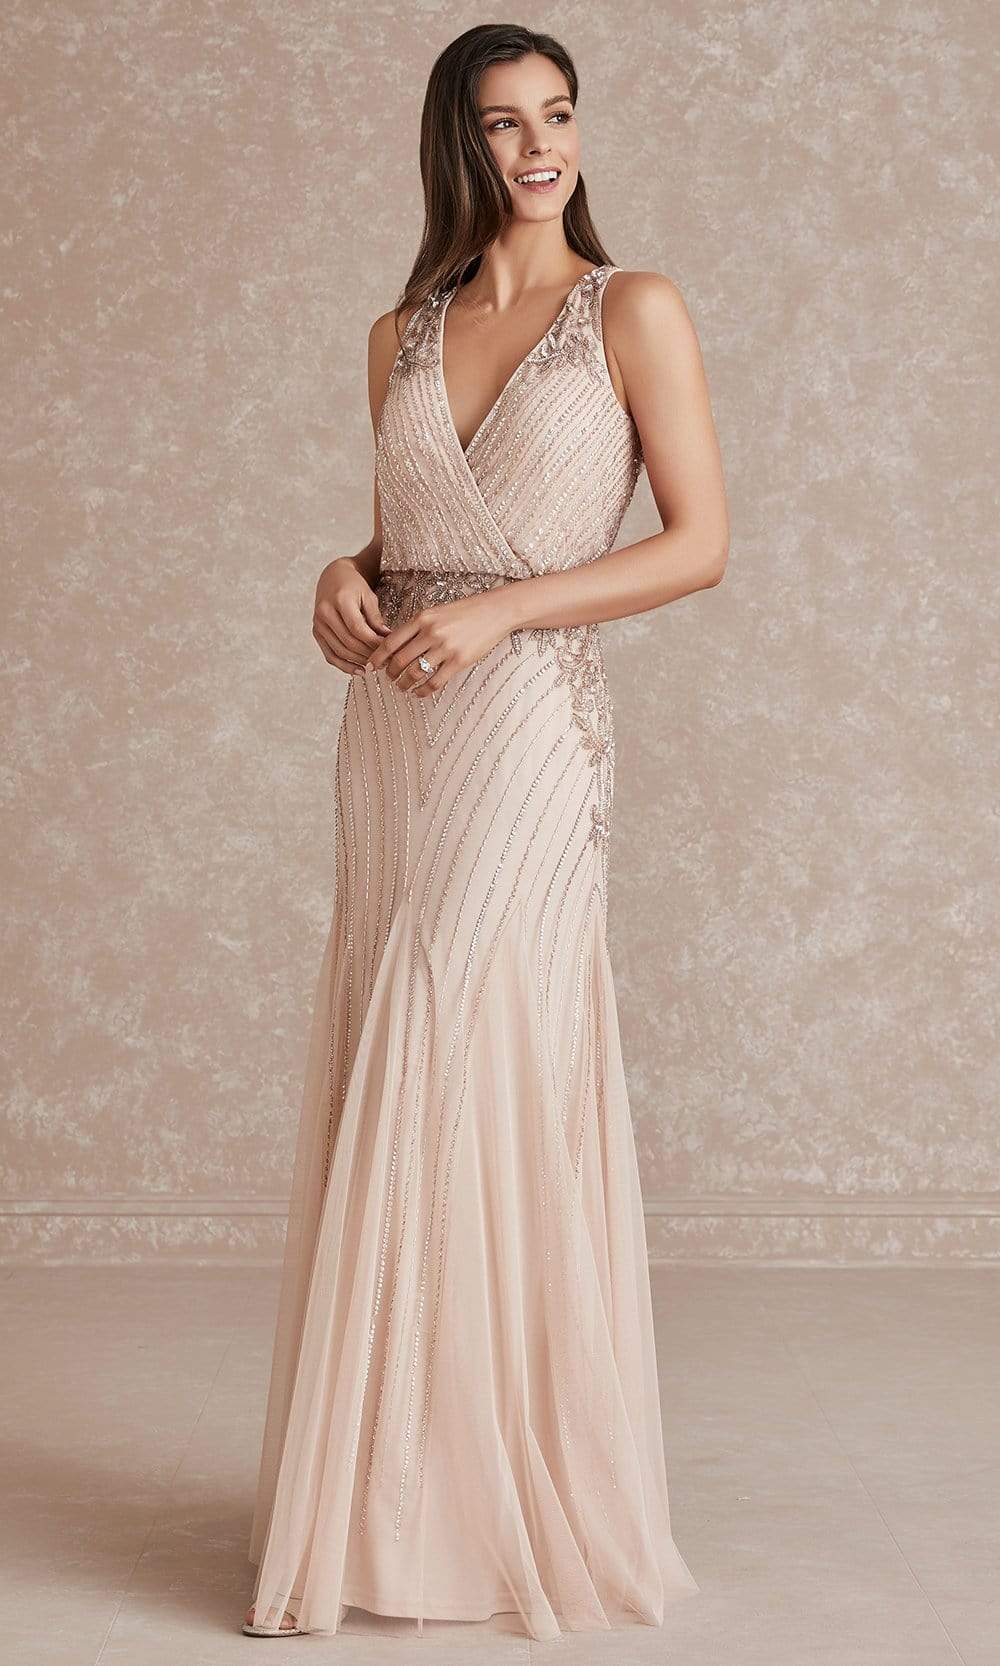 Adrianna Papell Evening - Sleeveless Blouson Bead Embellished Dress 40280SC In Pink